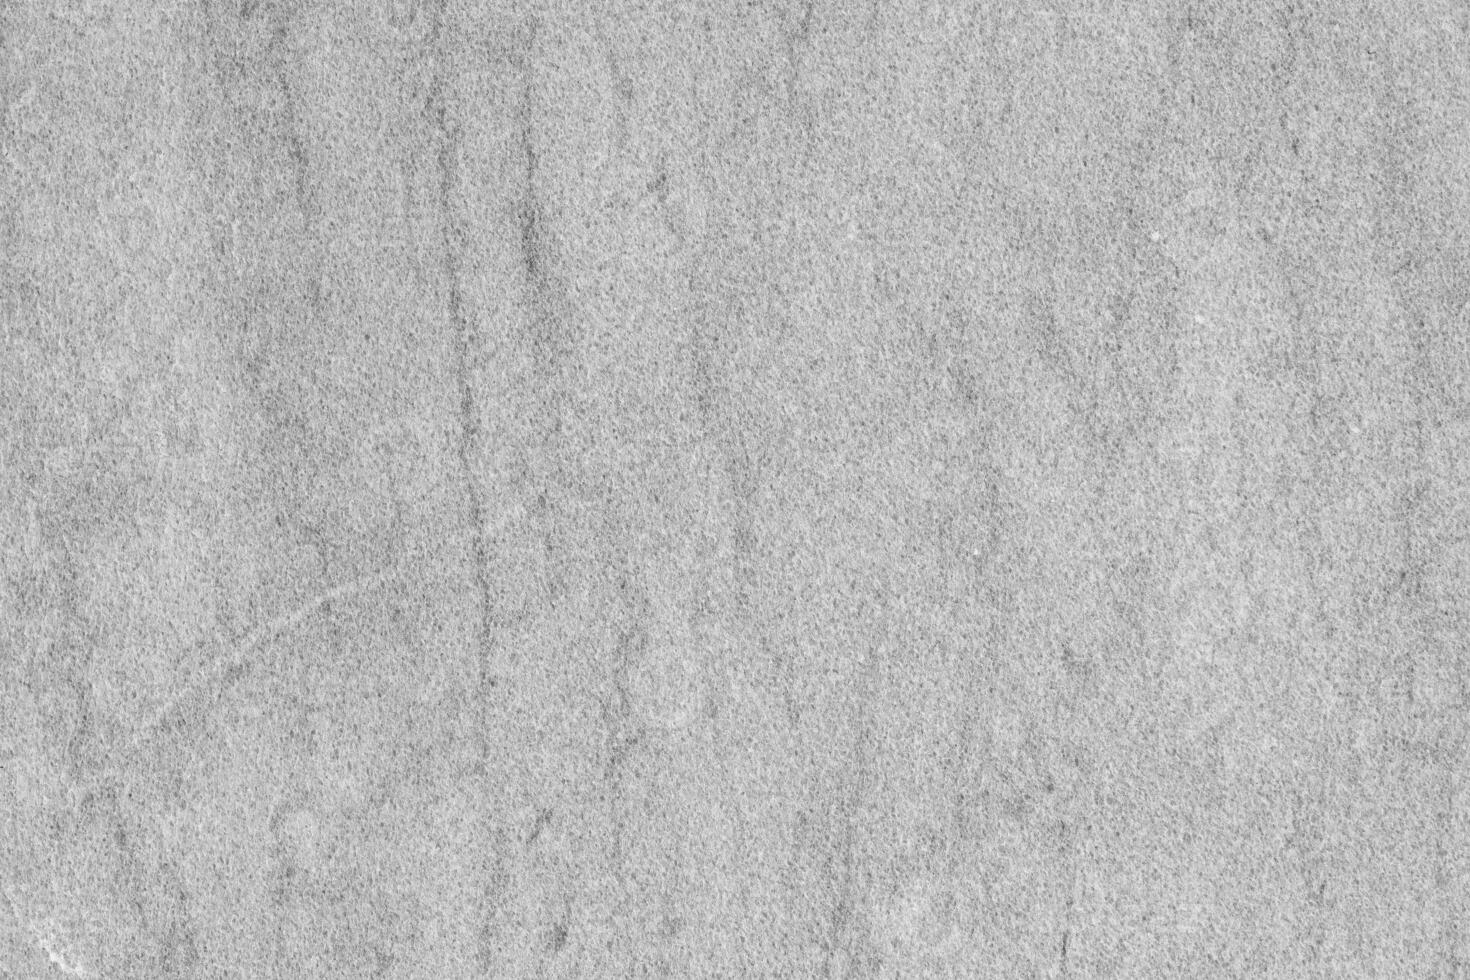 Texture of gray marble tiles with scratches. Abstract background. photo